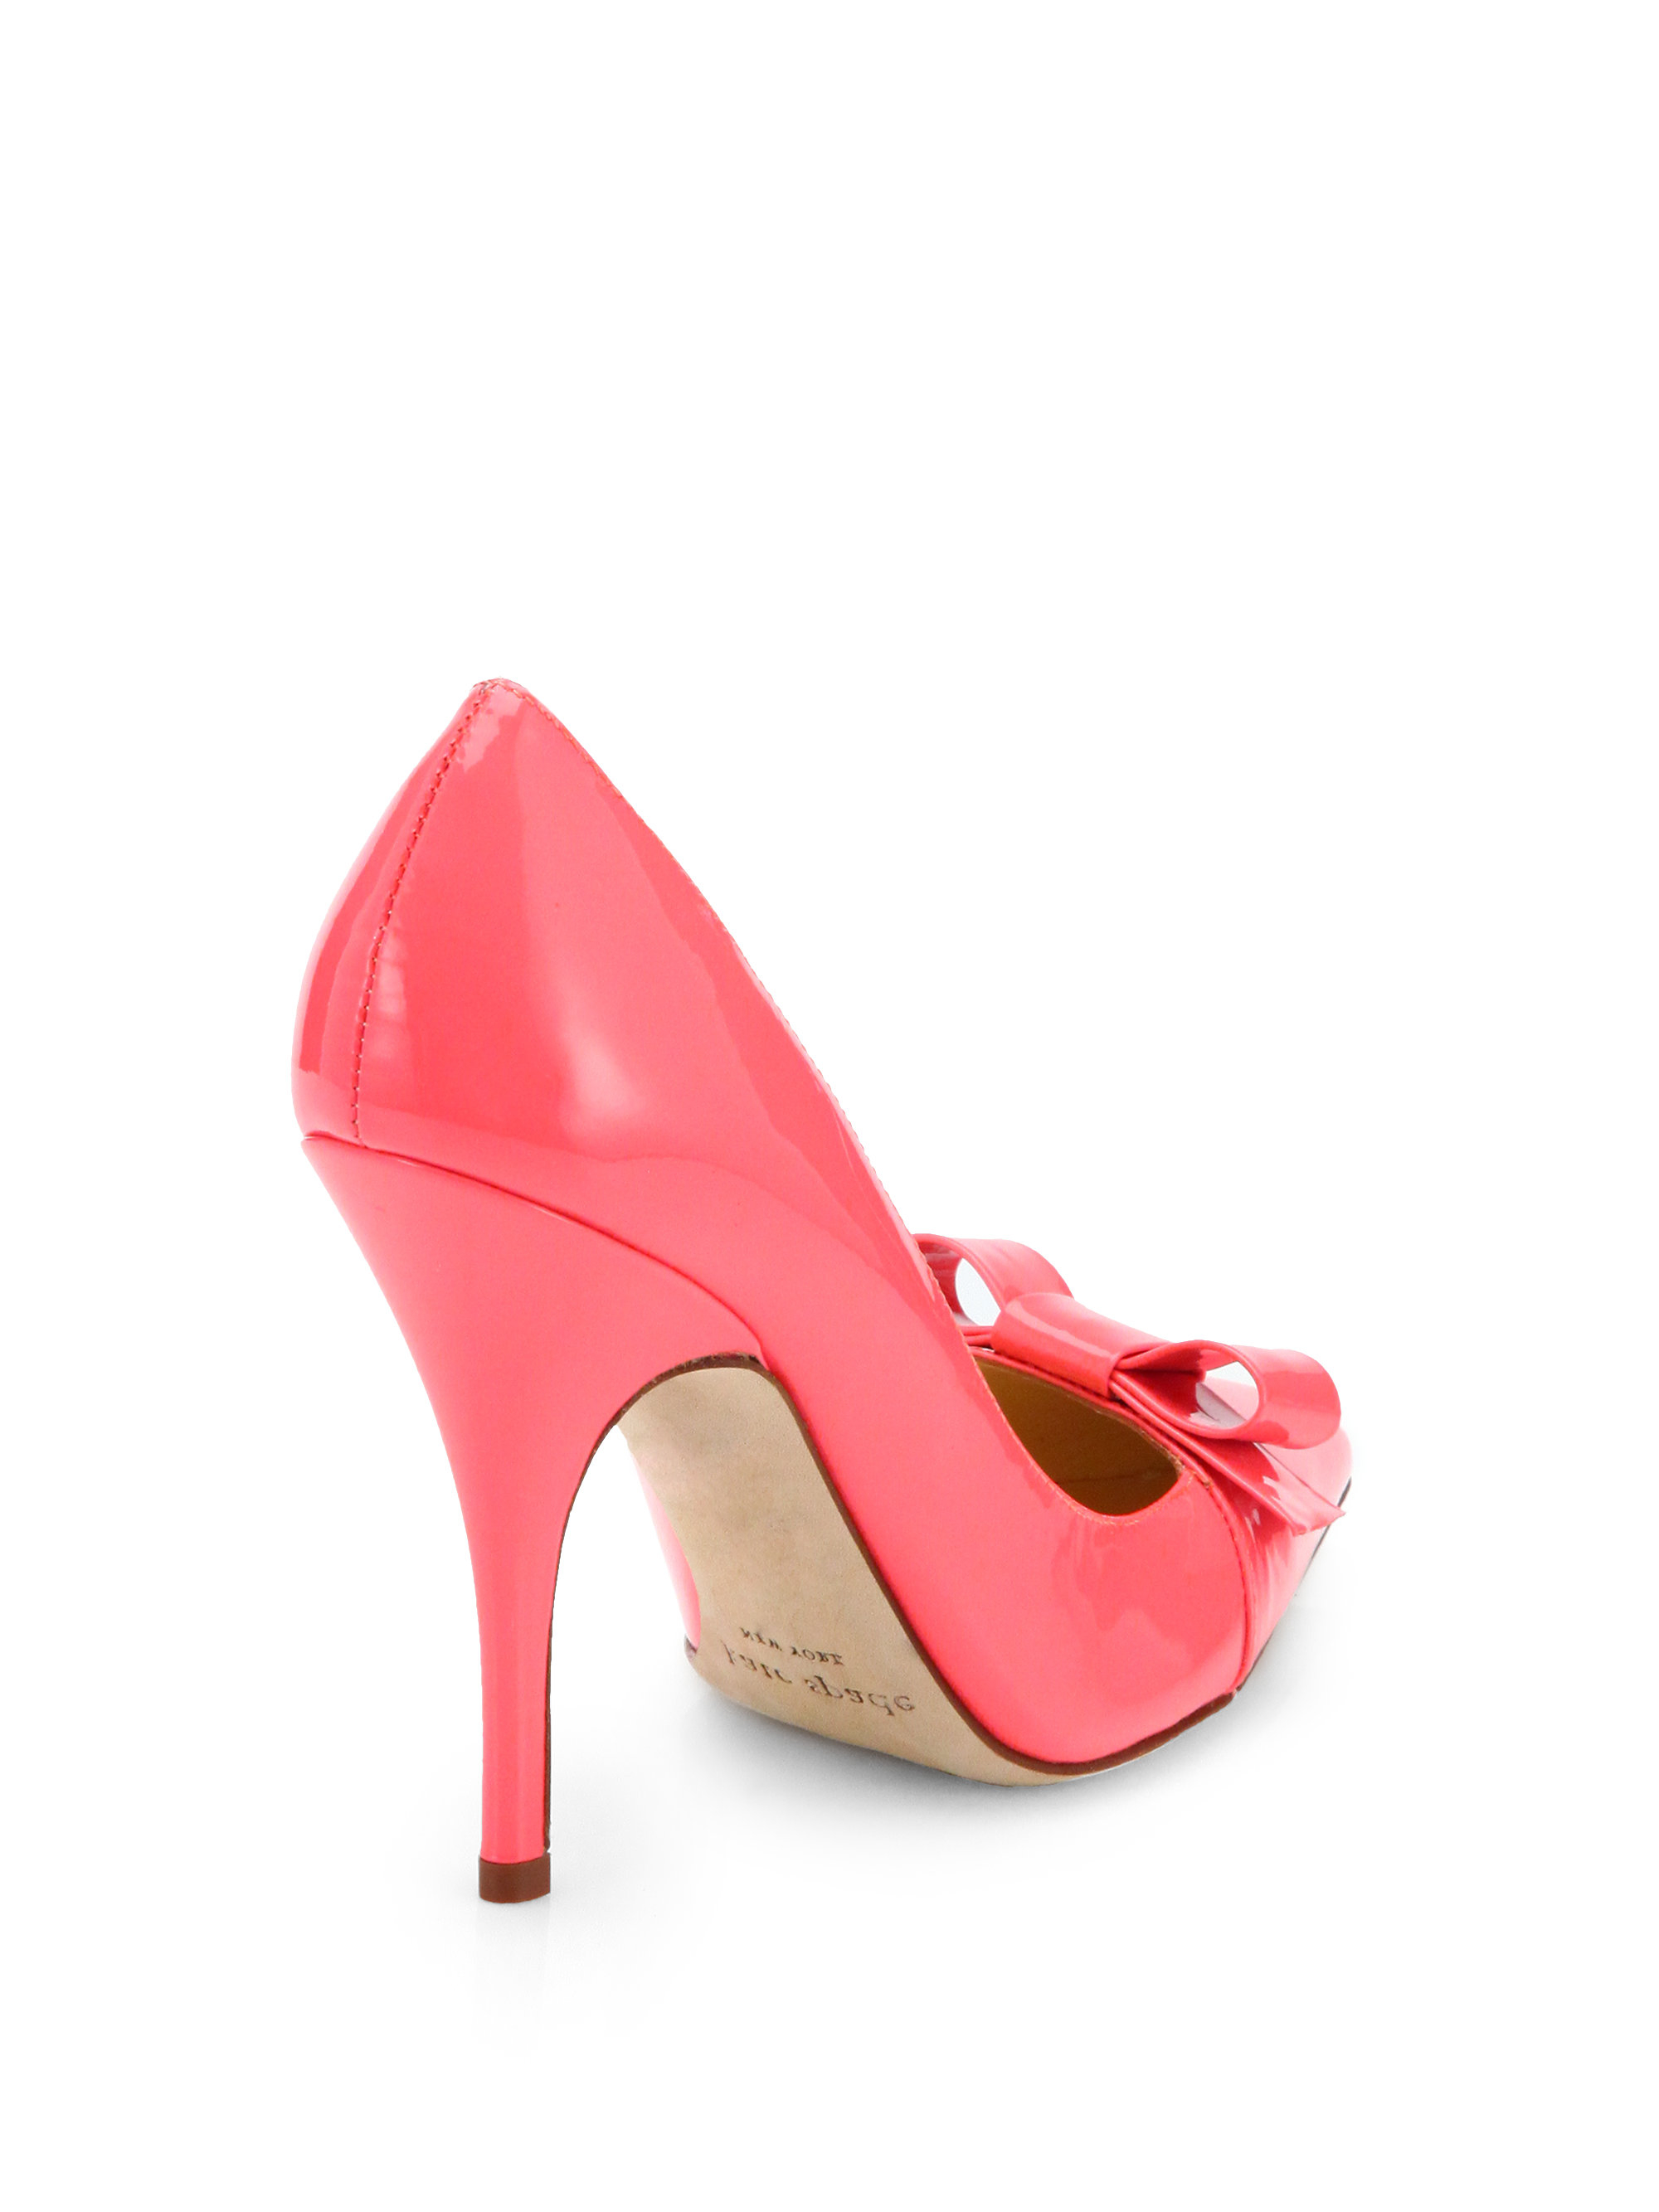 Lyst - Kate spade new york Lilia Bow Pumps in Pink